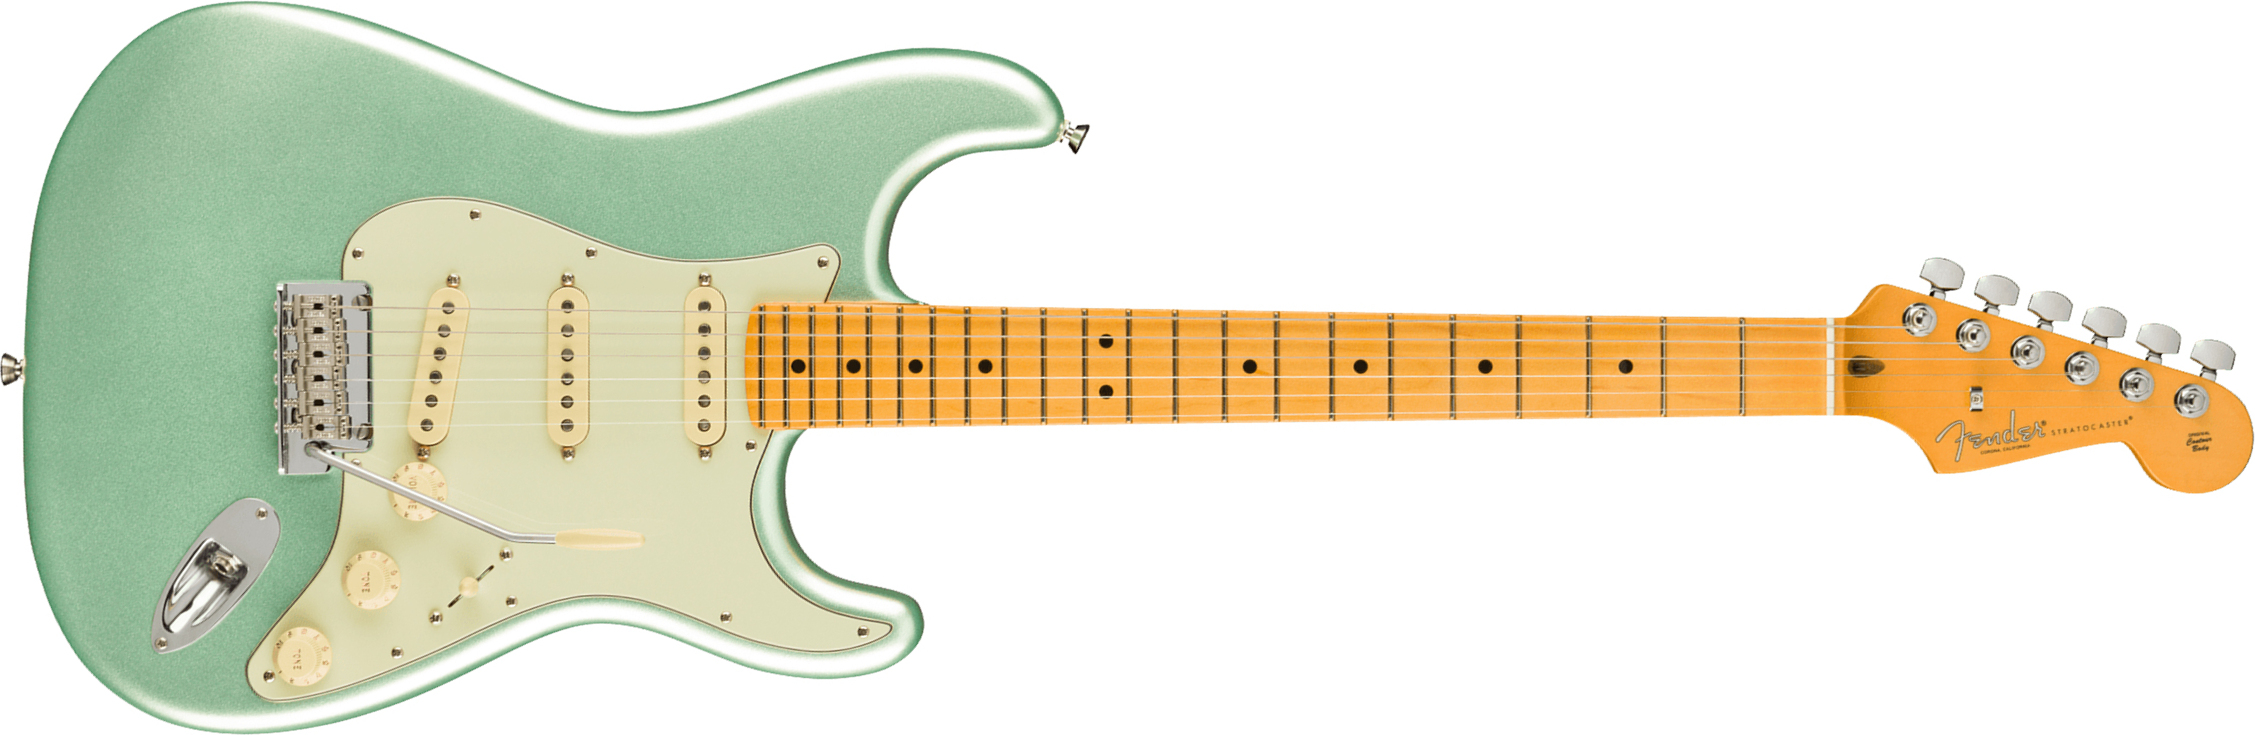 Fender Strat American Professional Ii Usa Mn - Mystic Surf Green - Guitare Électrique Forme Str - Main picture